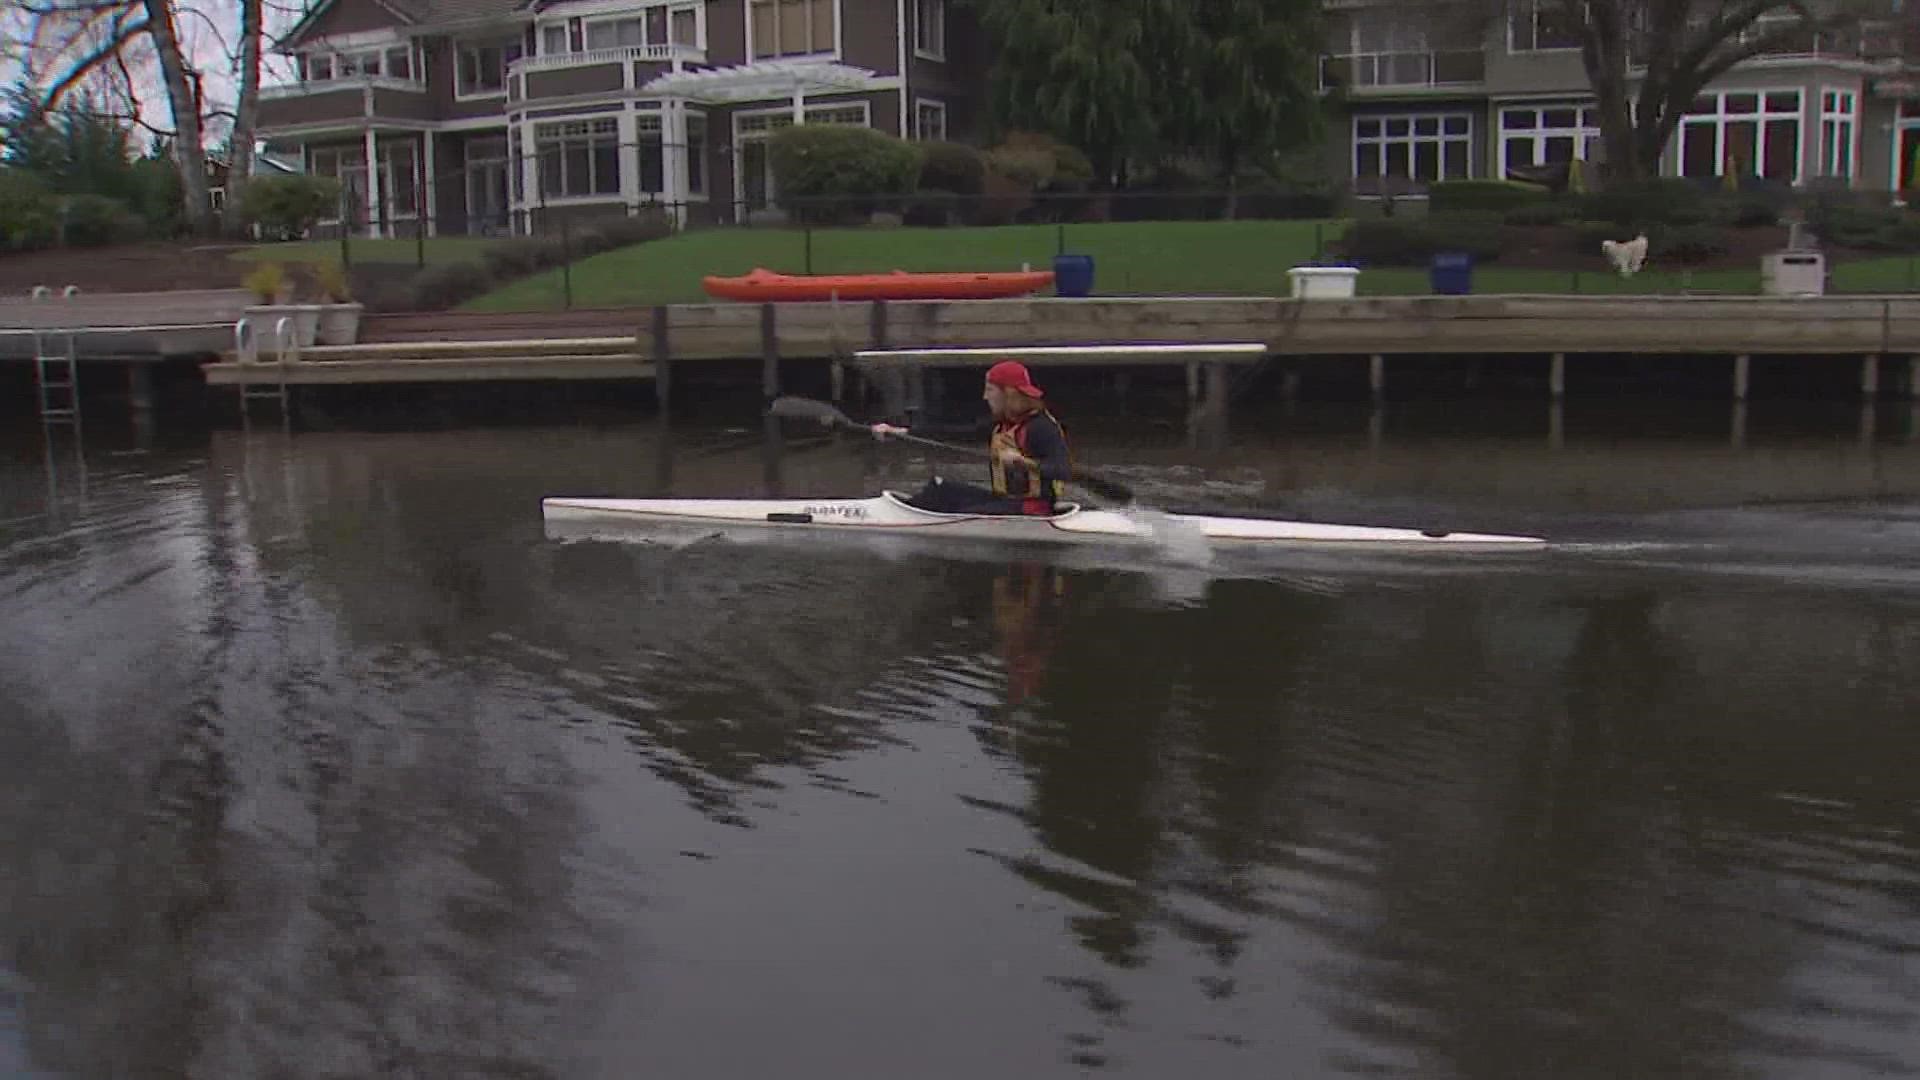 The Cascade Canoe and Kayak Race Team may need to find a new home as rent prices in the area rise.